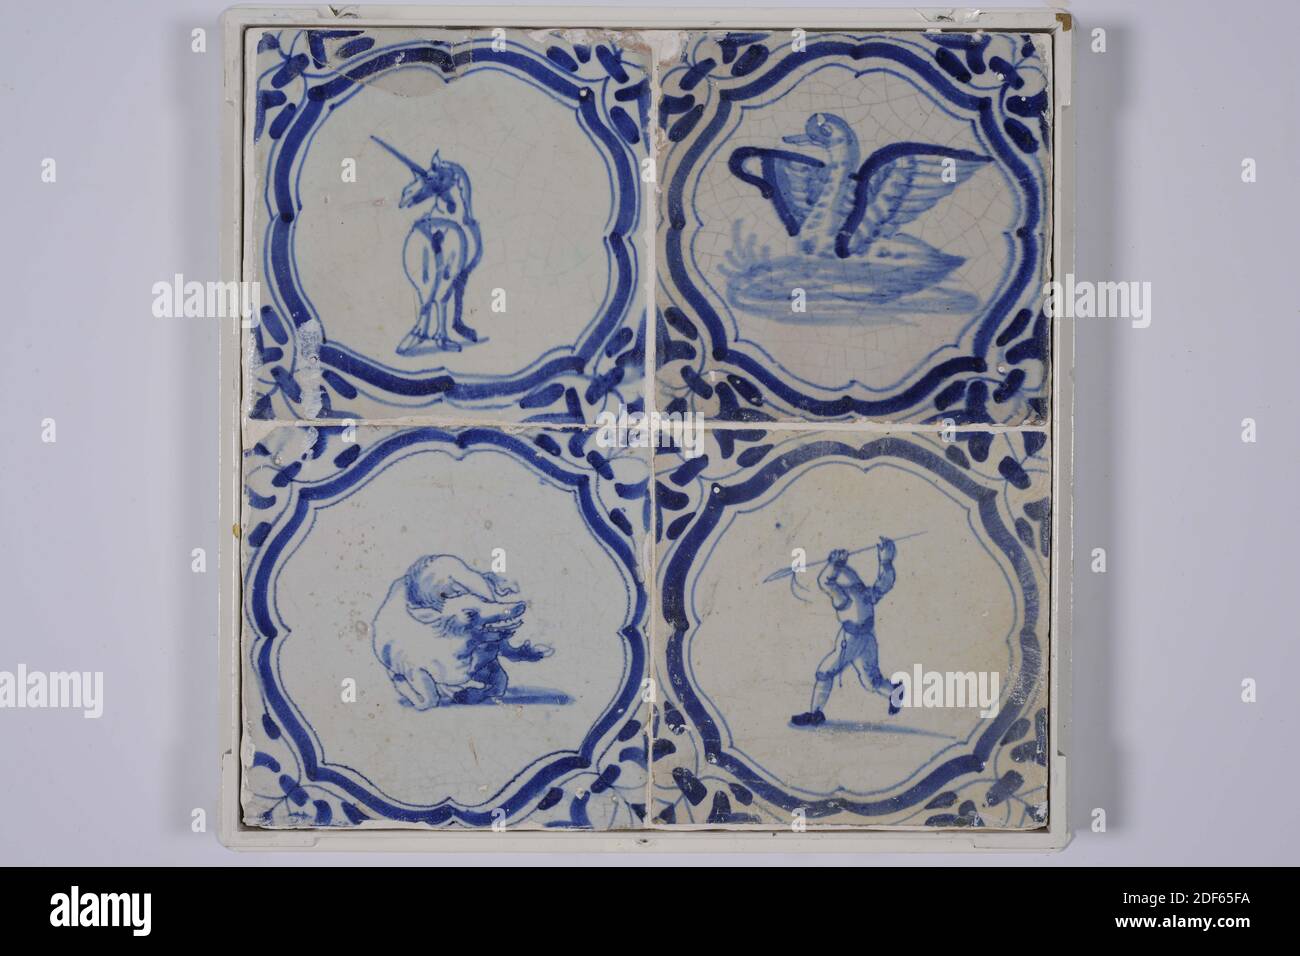 tile field, Anonymous, first half 17th century, With frame: 28.8 x 28.8 x 3.4cm (288 x 288 x 34mm), General: 12.8 x 12.8 x 1.3cm (128 x 128 x 13mm), unicorn, pig , duck, hunter, northern netherlands, Tile field of four tiles (two by two) made of earthenware covered with tin glaze painted in blue. The tile field depicts animals in braces and a hunter with a spear. Clockwise: a unicorn, a duck, a boar, and the hunter with spear. The tiles have a wing leaf as a corner motif, 1985 Stock Photo